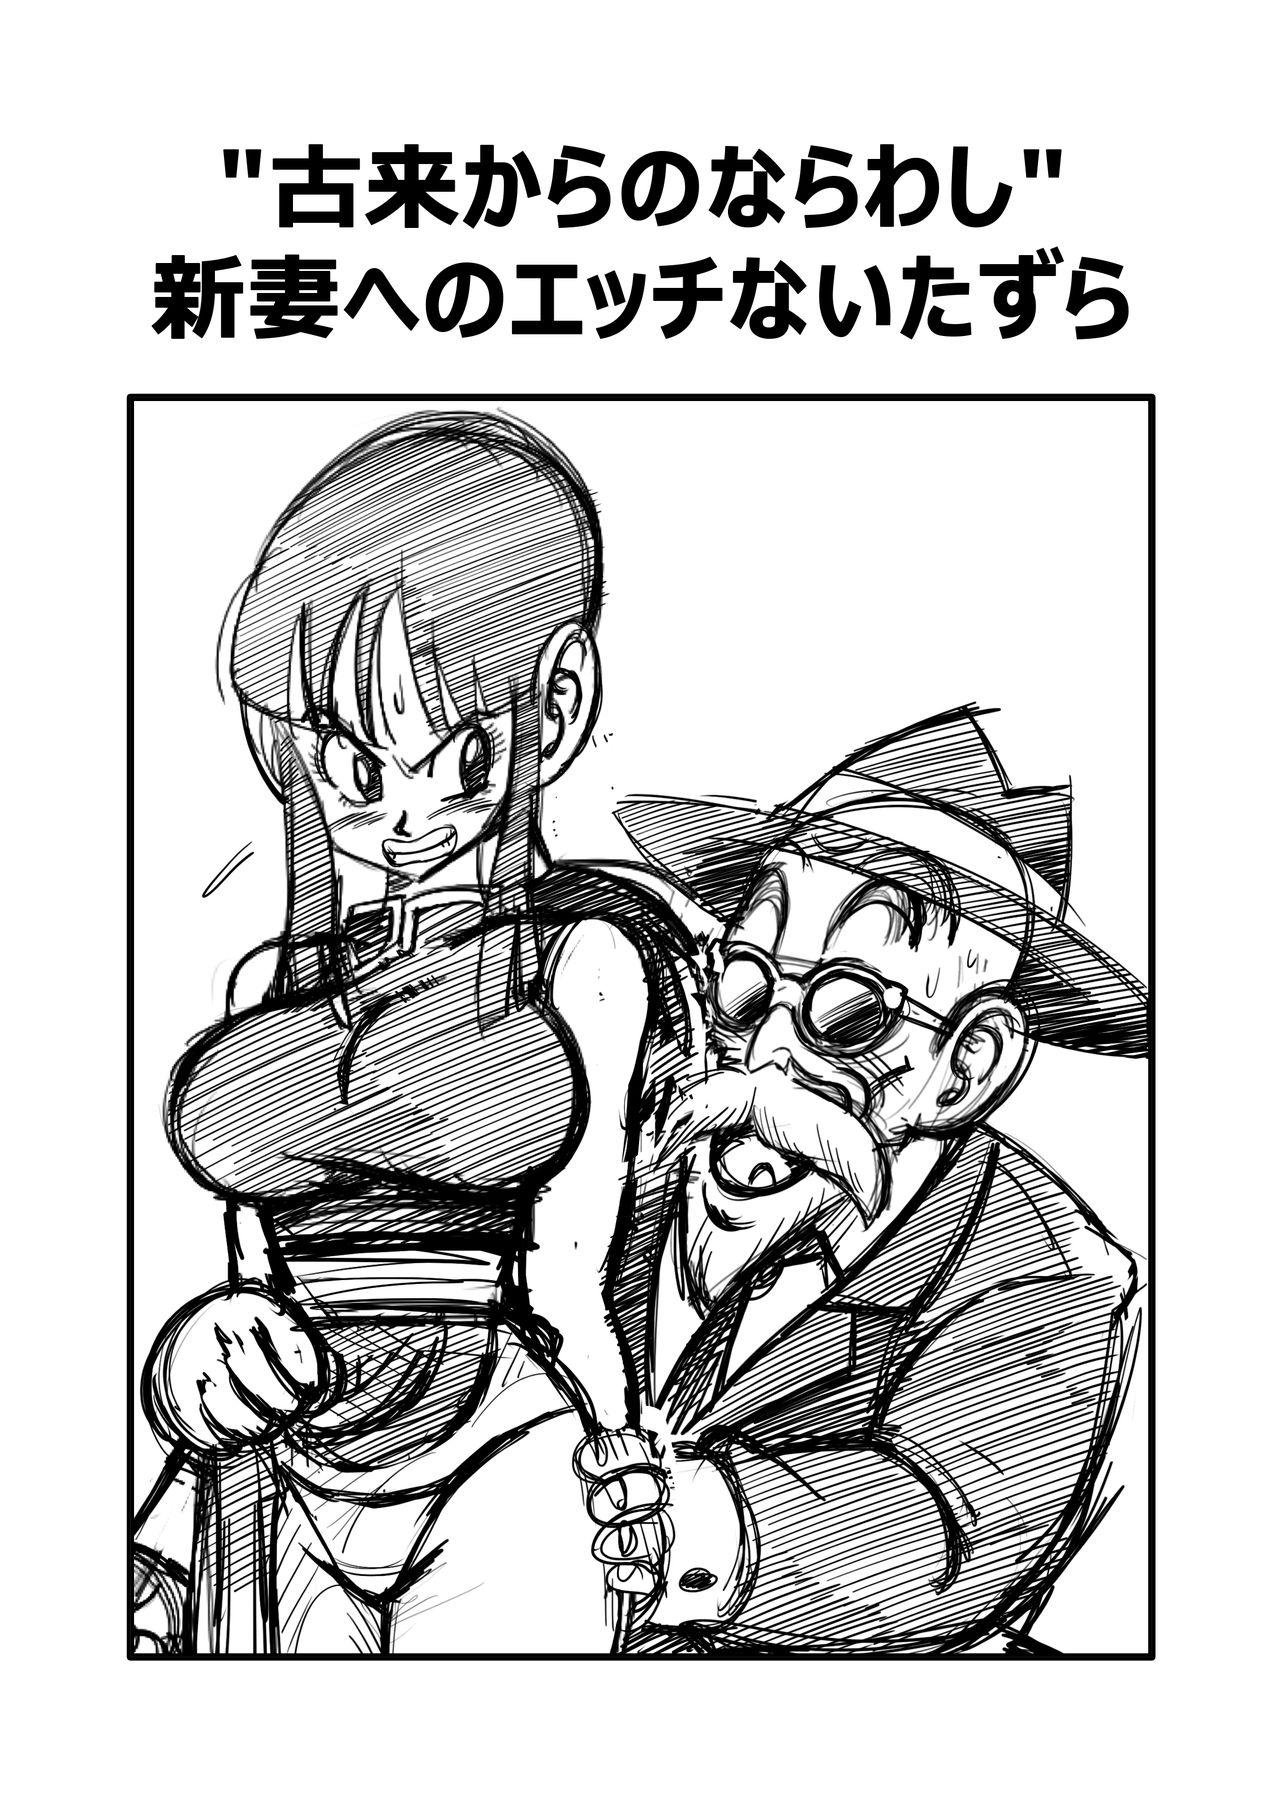 Best Blow Job "An Ancient Tradition" - Young Wife is Harassed! - Dragon ball z Ddf Porn - Page 3